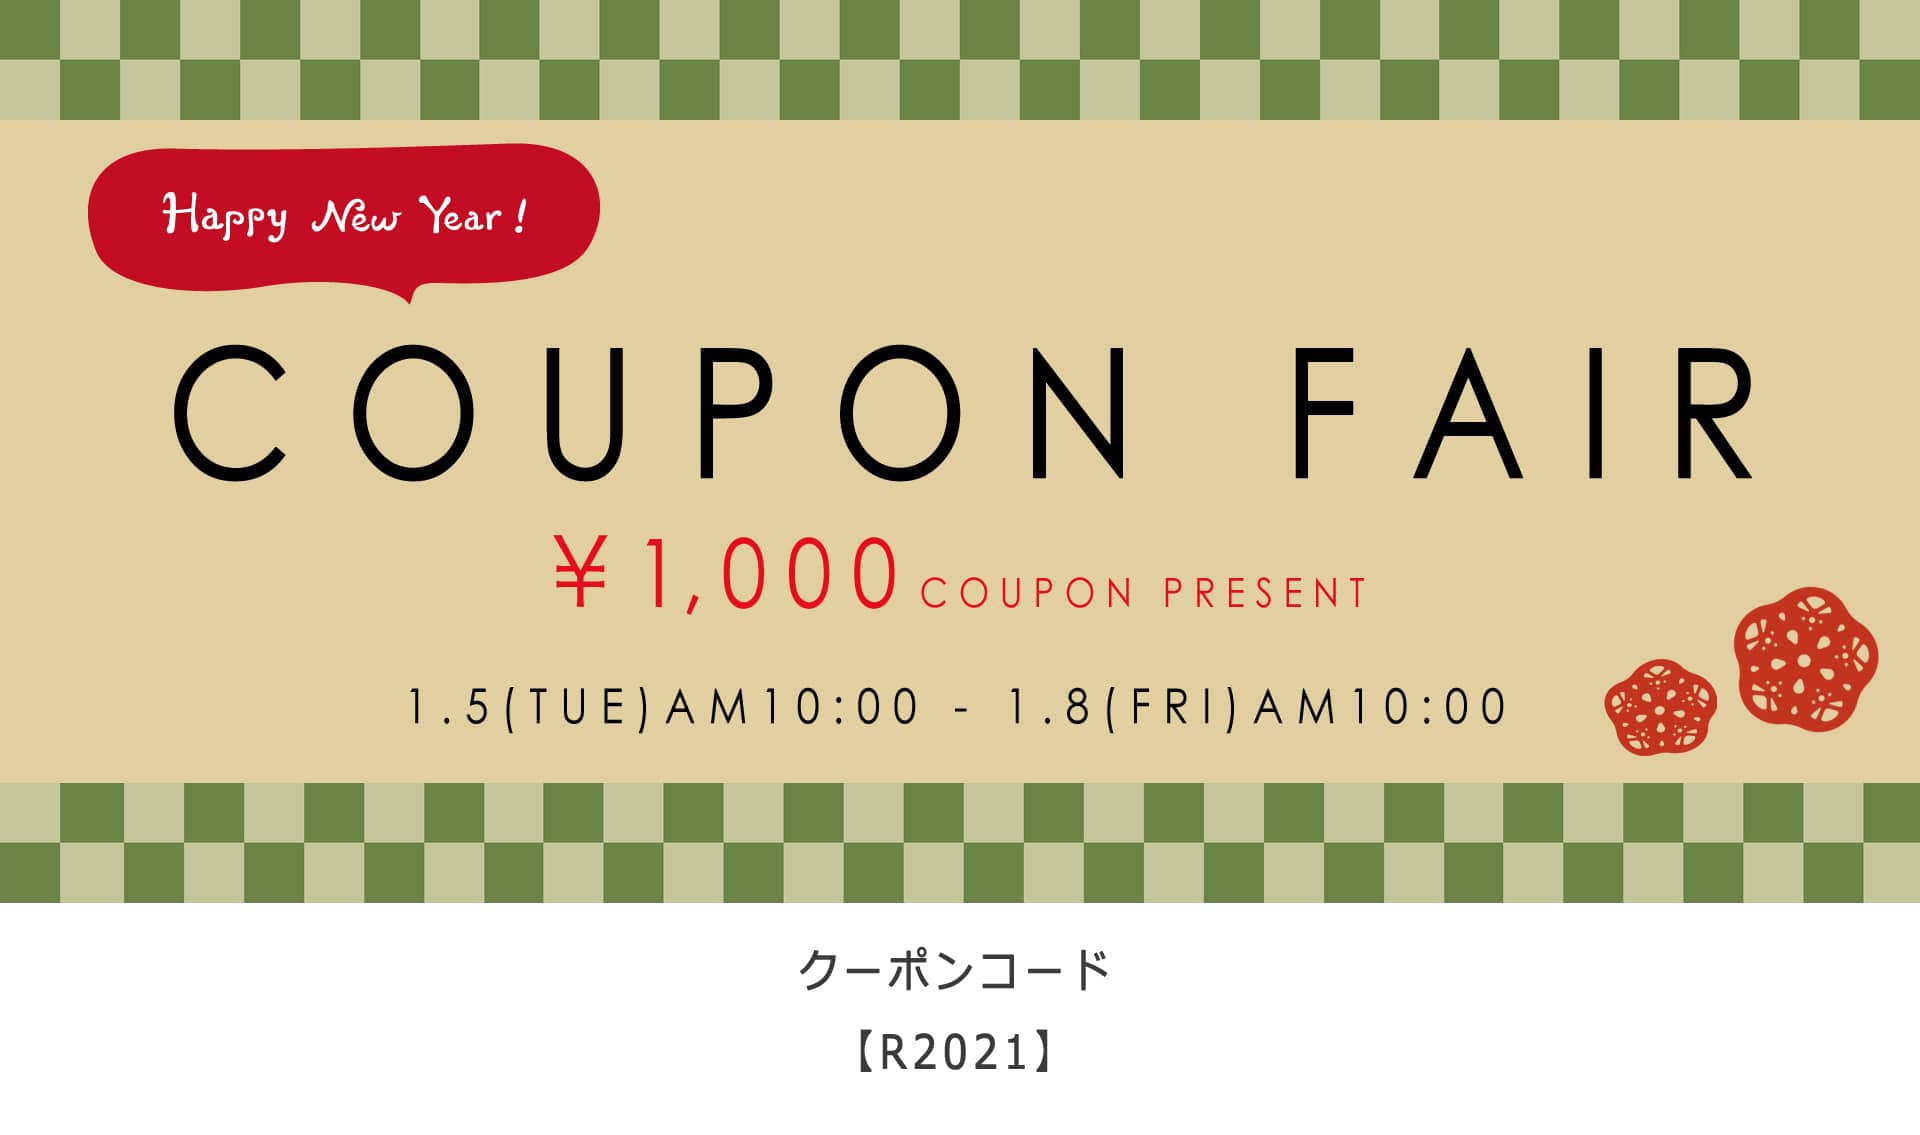 HAPPY NEW YEAR COUPON 2021